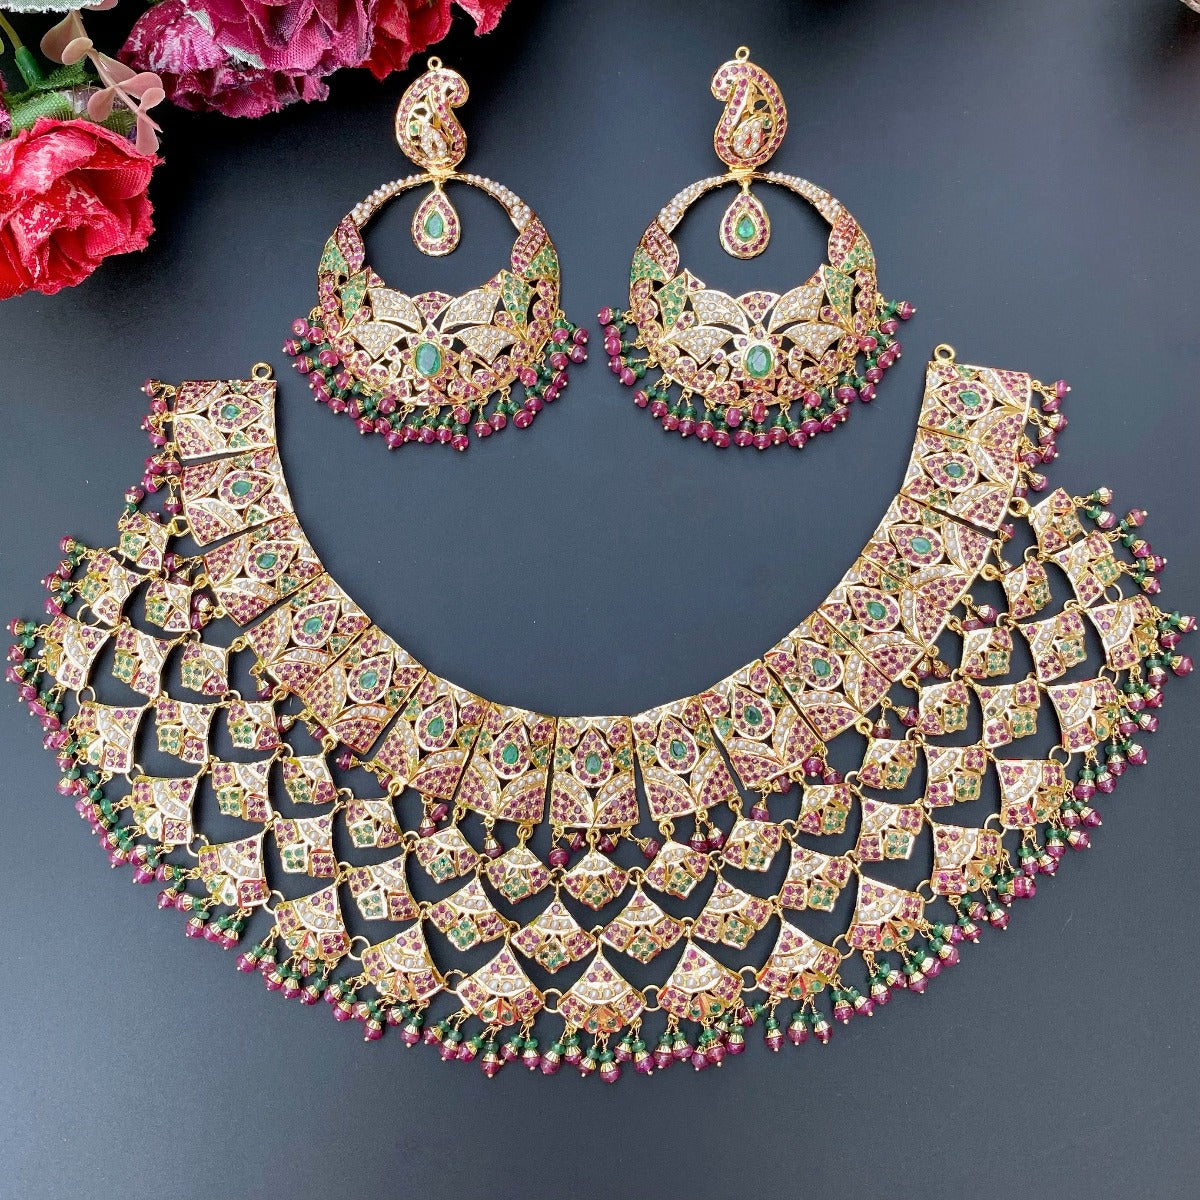 heavy bridal necklace with chandbali earrings studded with precious stones